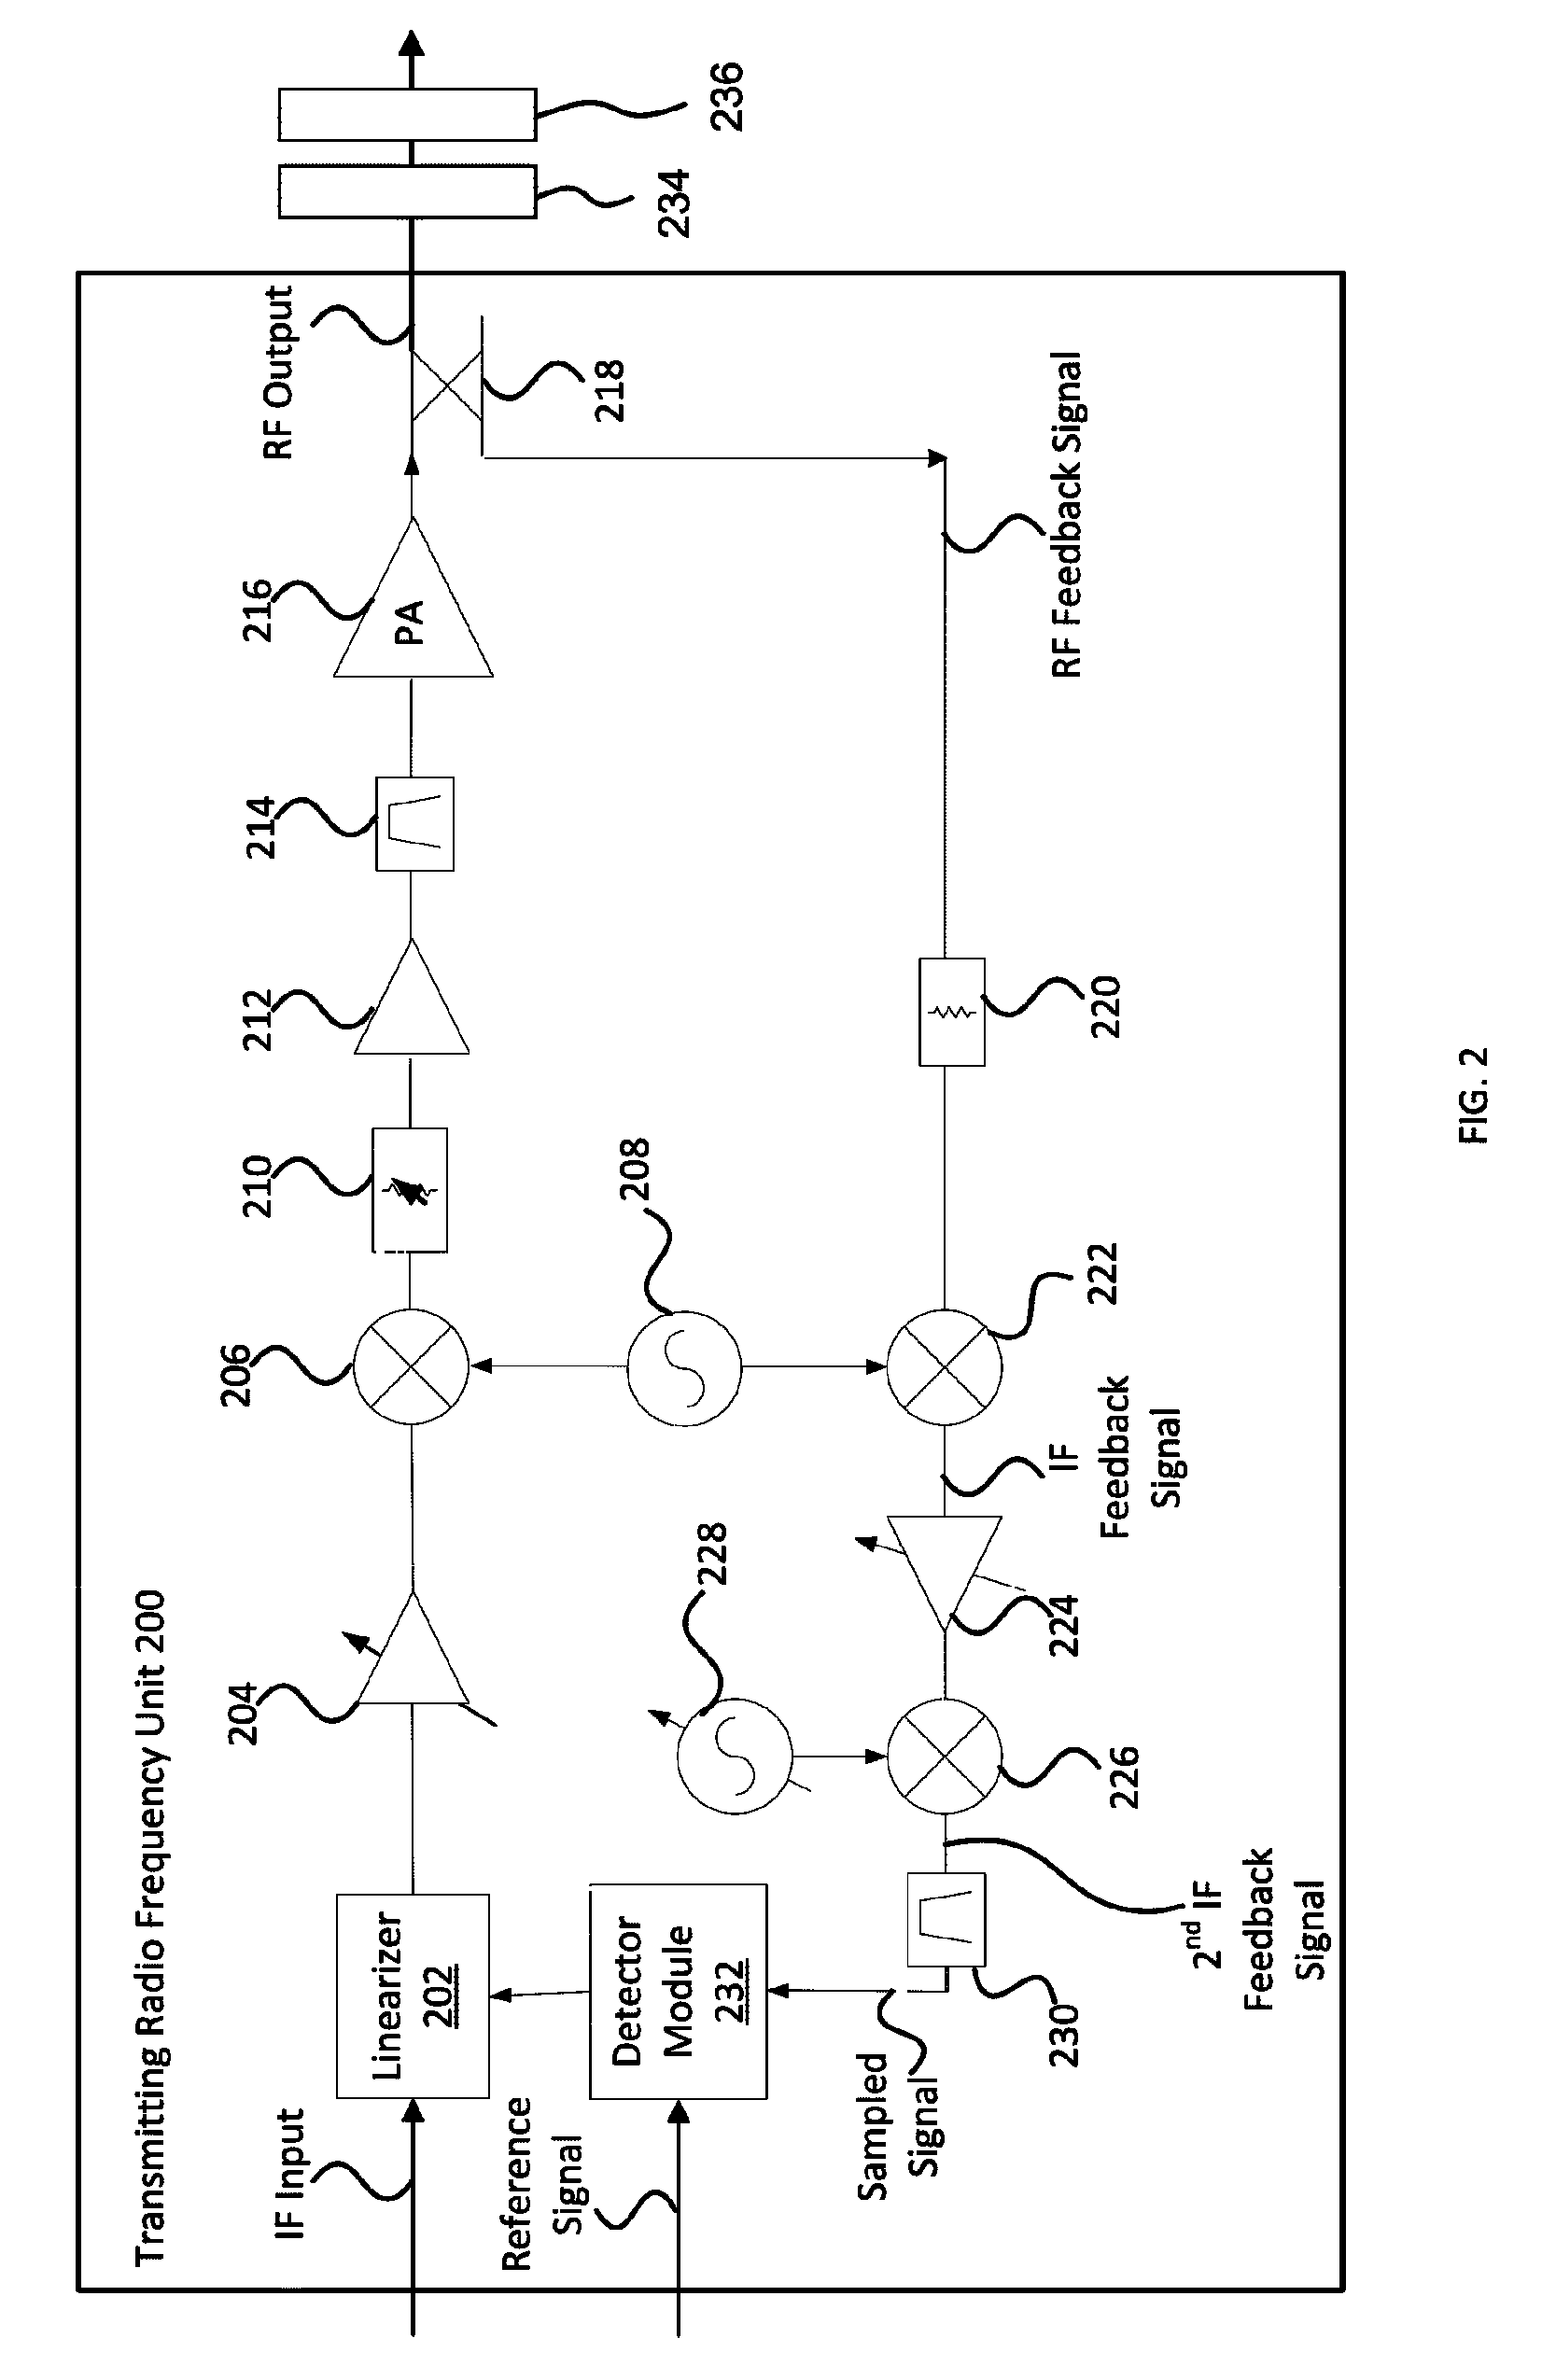 Systems and methods for adaptive power amplifier linearization